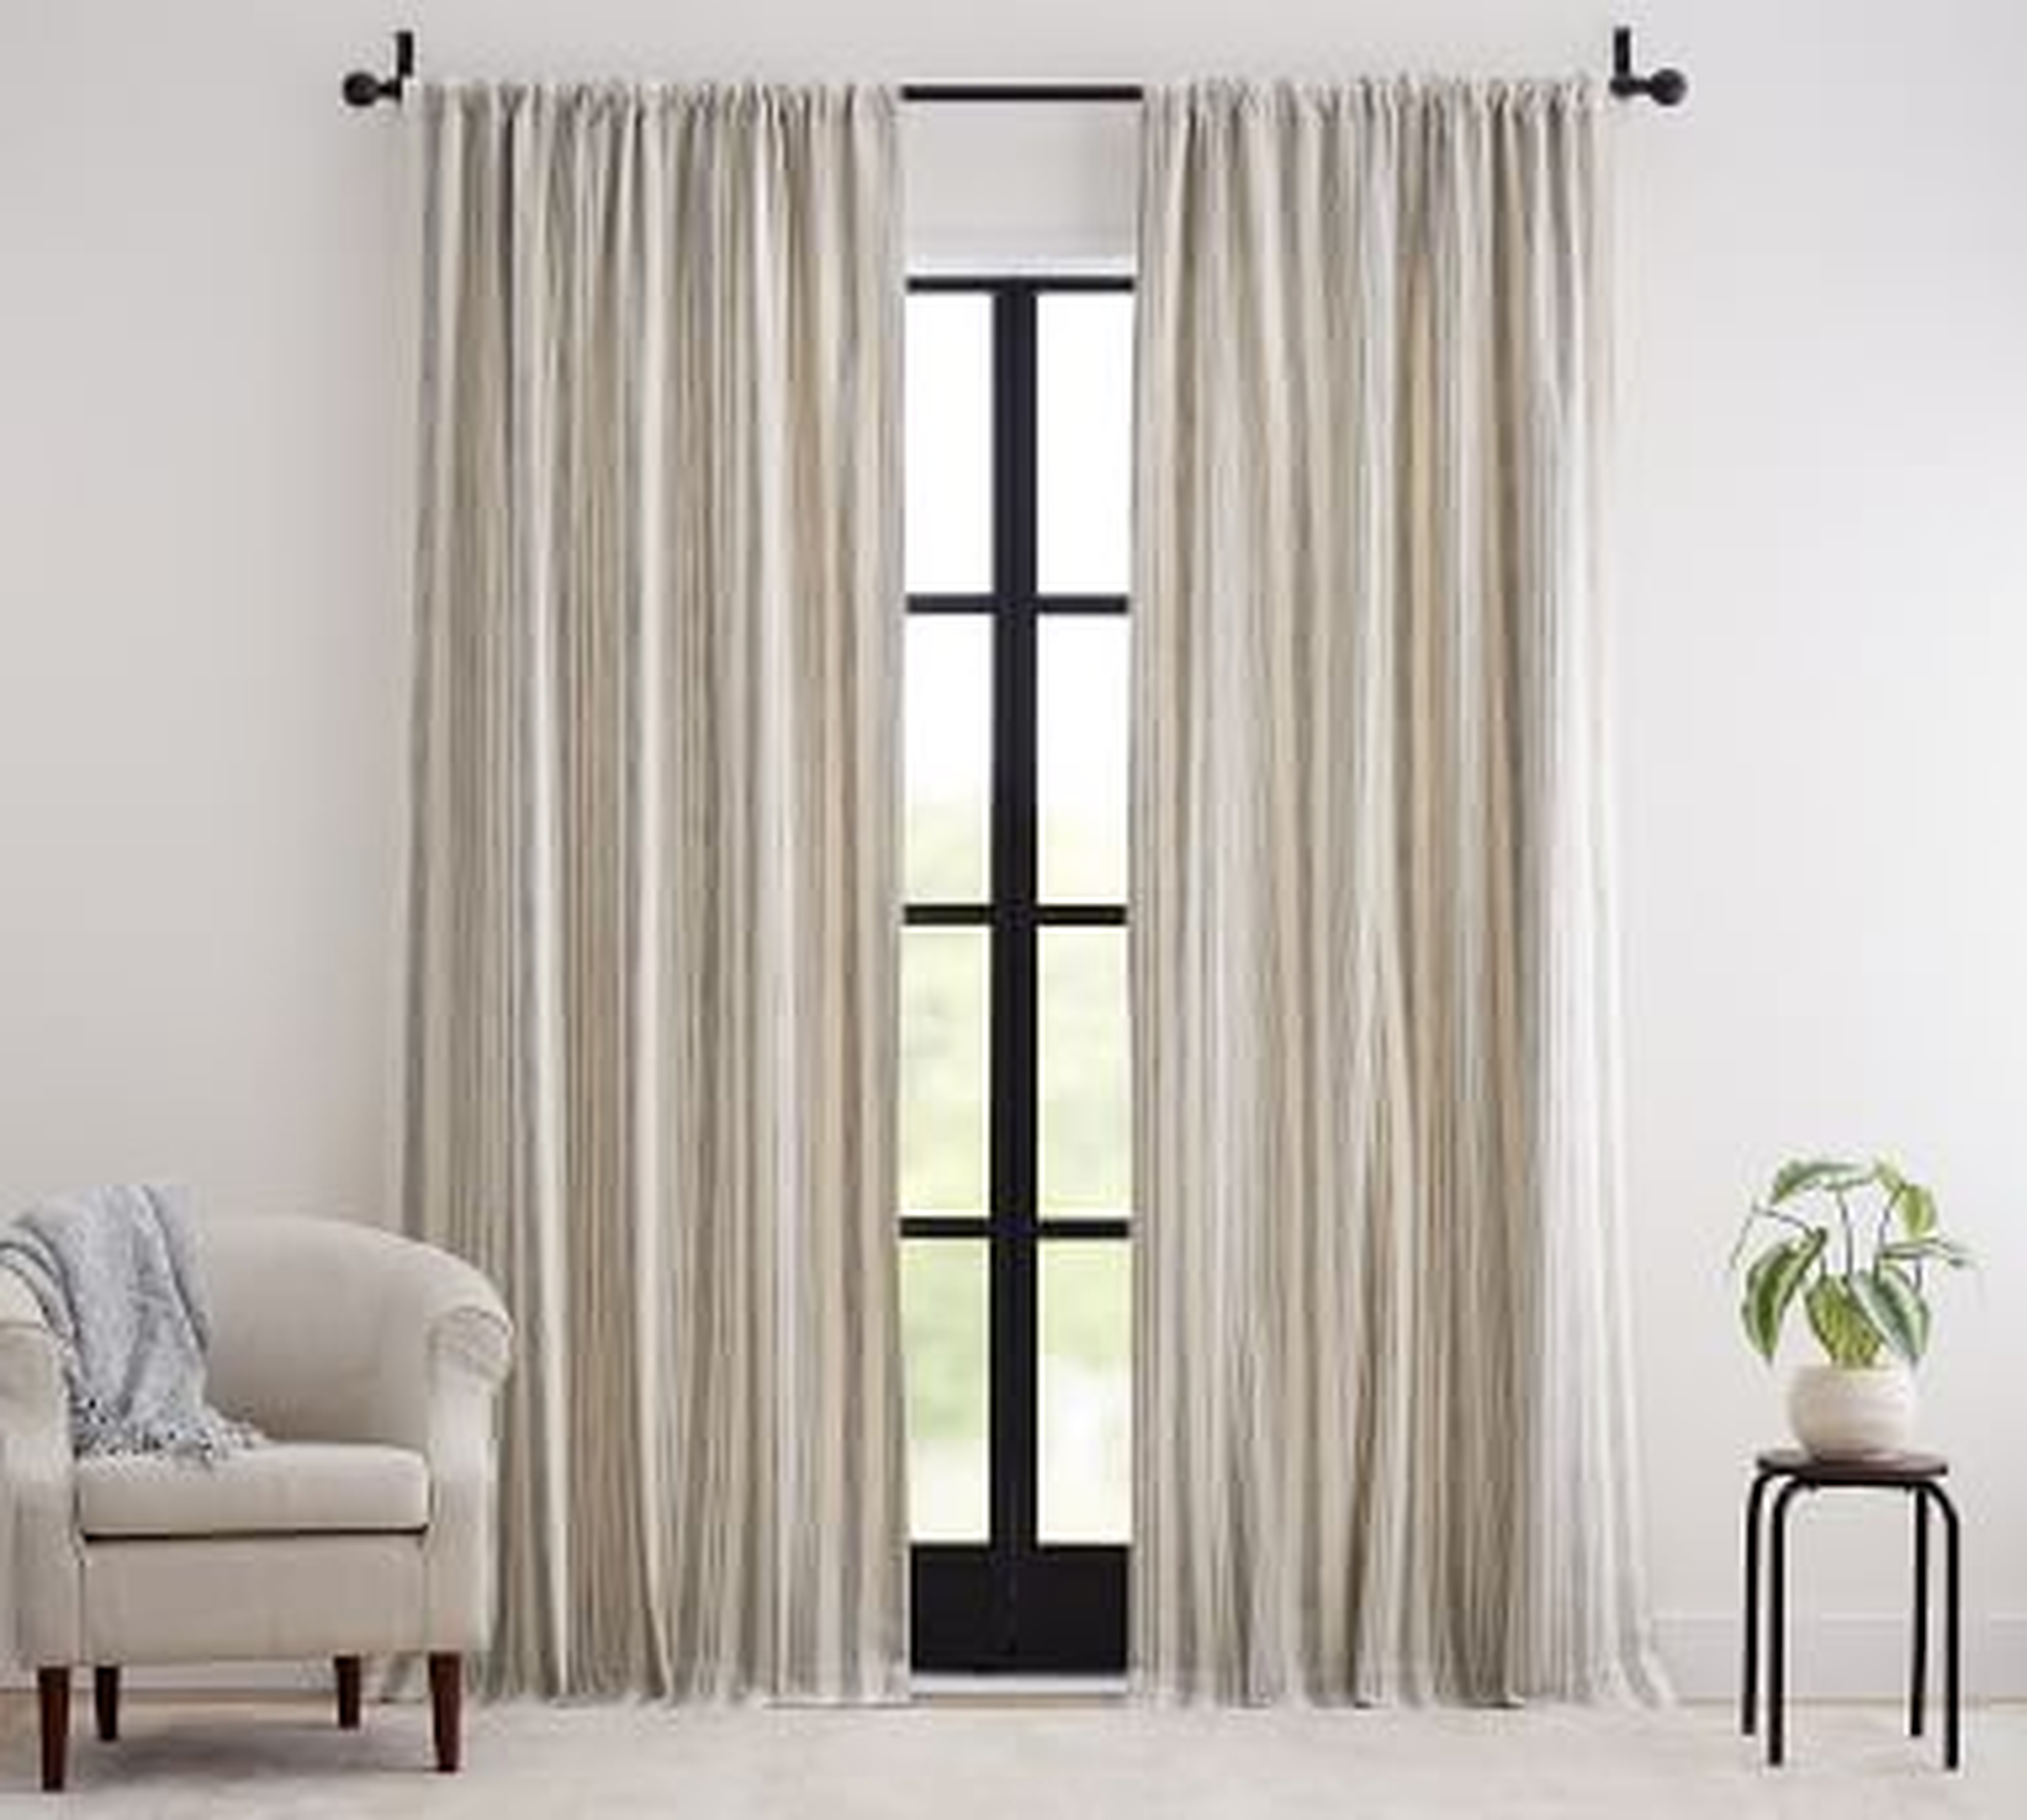 Hawthorn Striped Cotton Curtain, 50 x 84", Charcoal - Pottery Barn